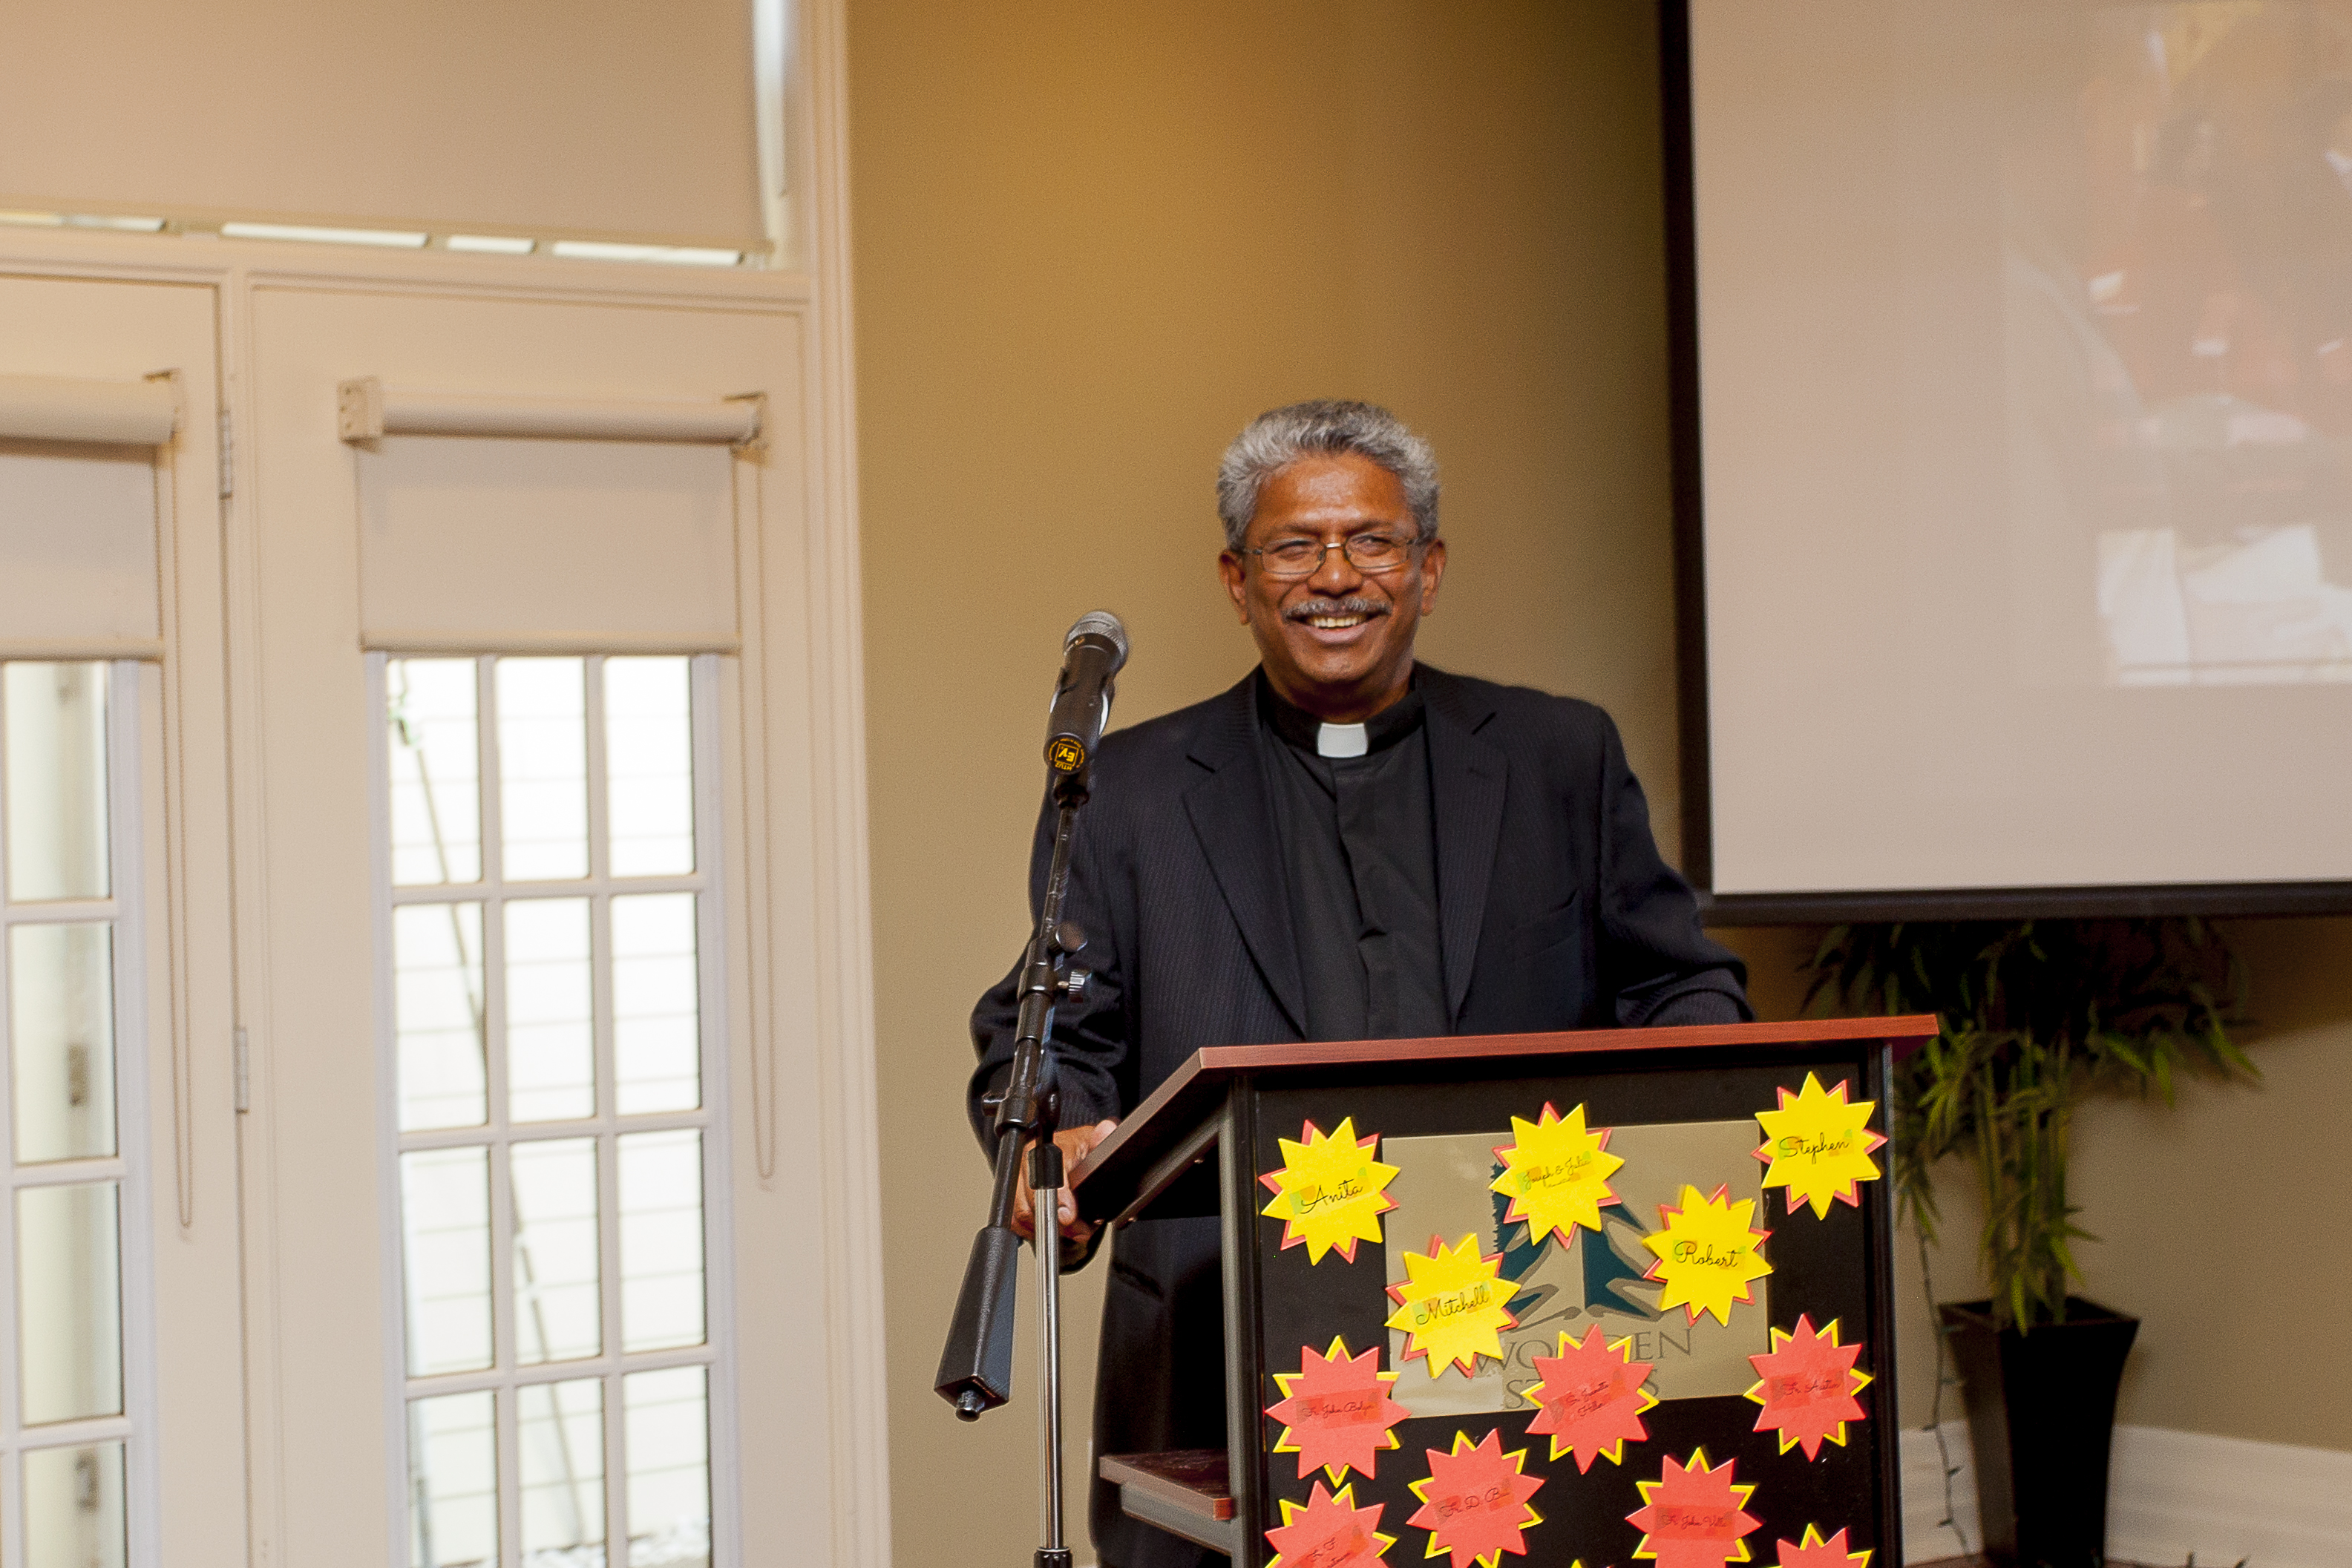 Fr. Joseph Rodrigues gives speech at the 50th Anniversary reception